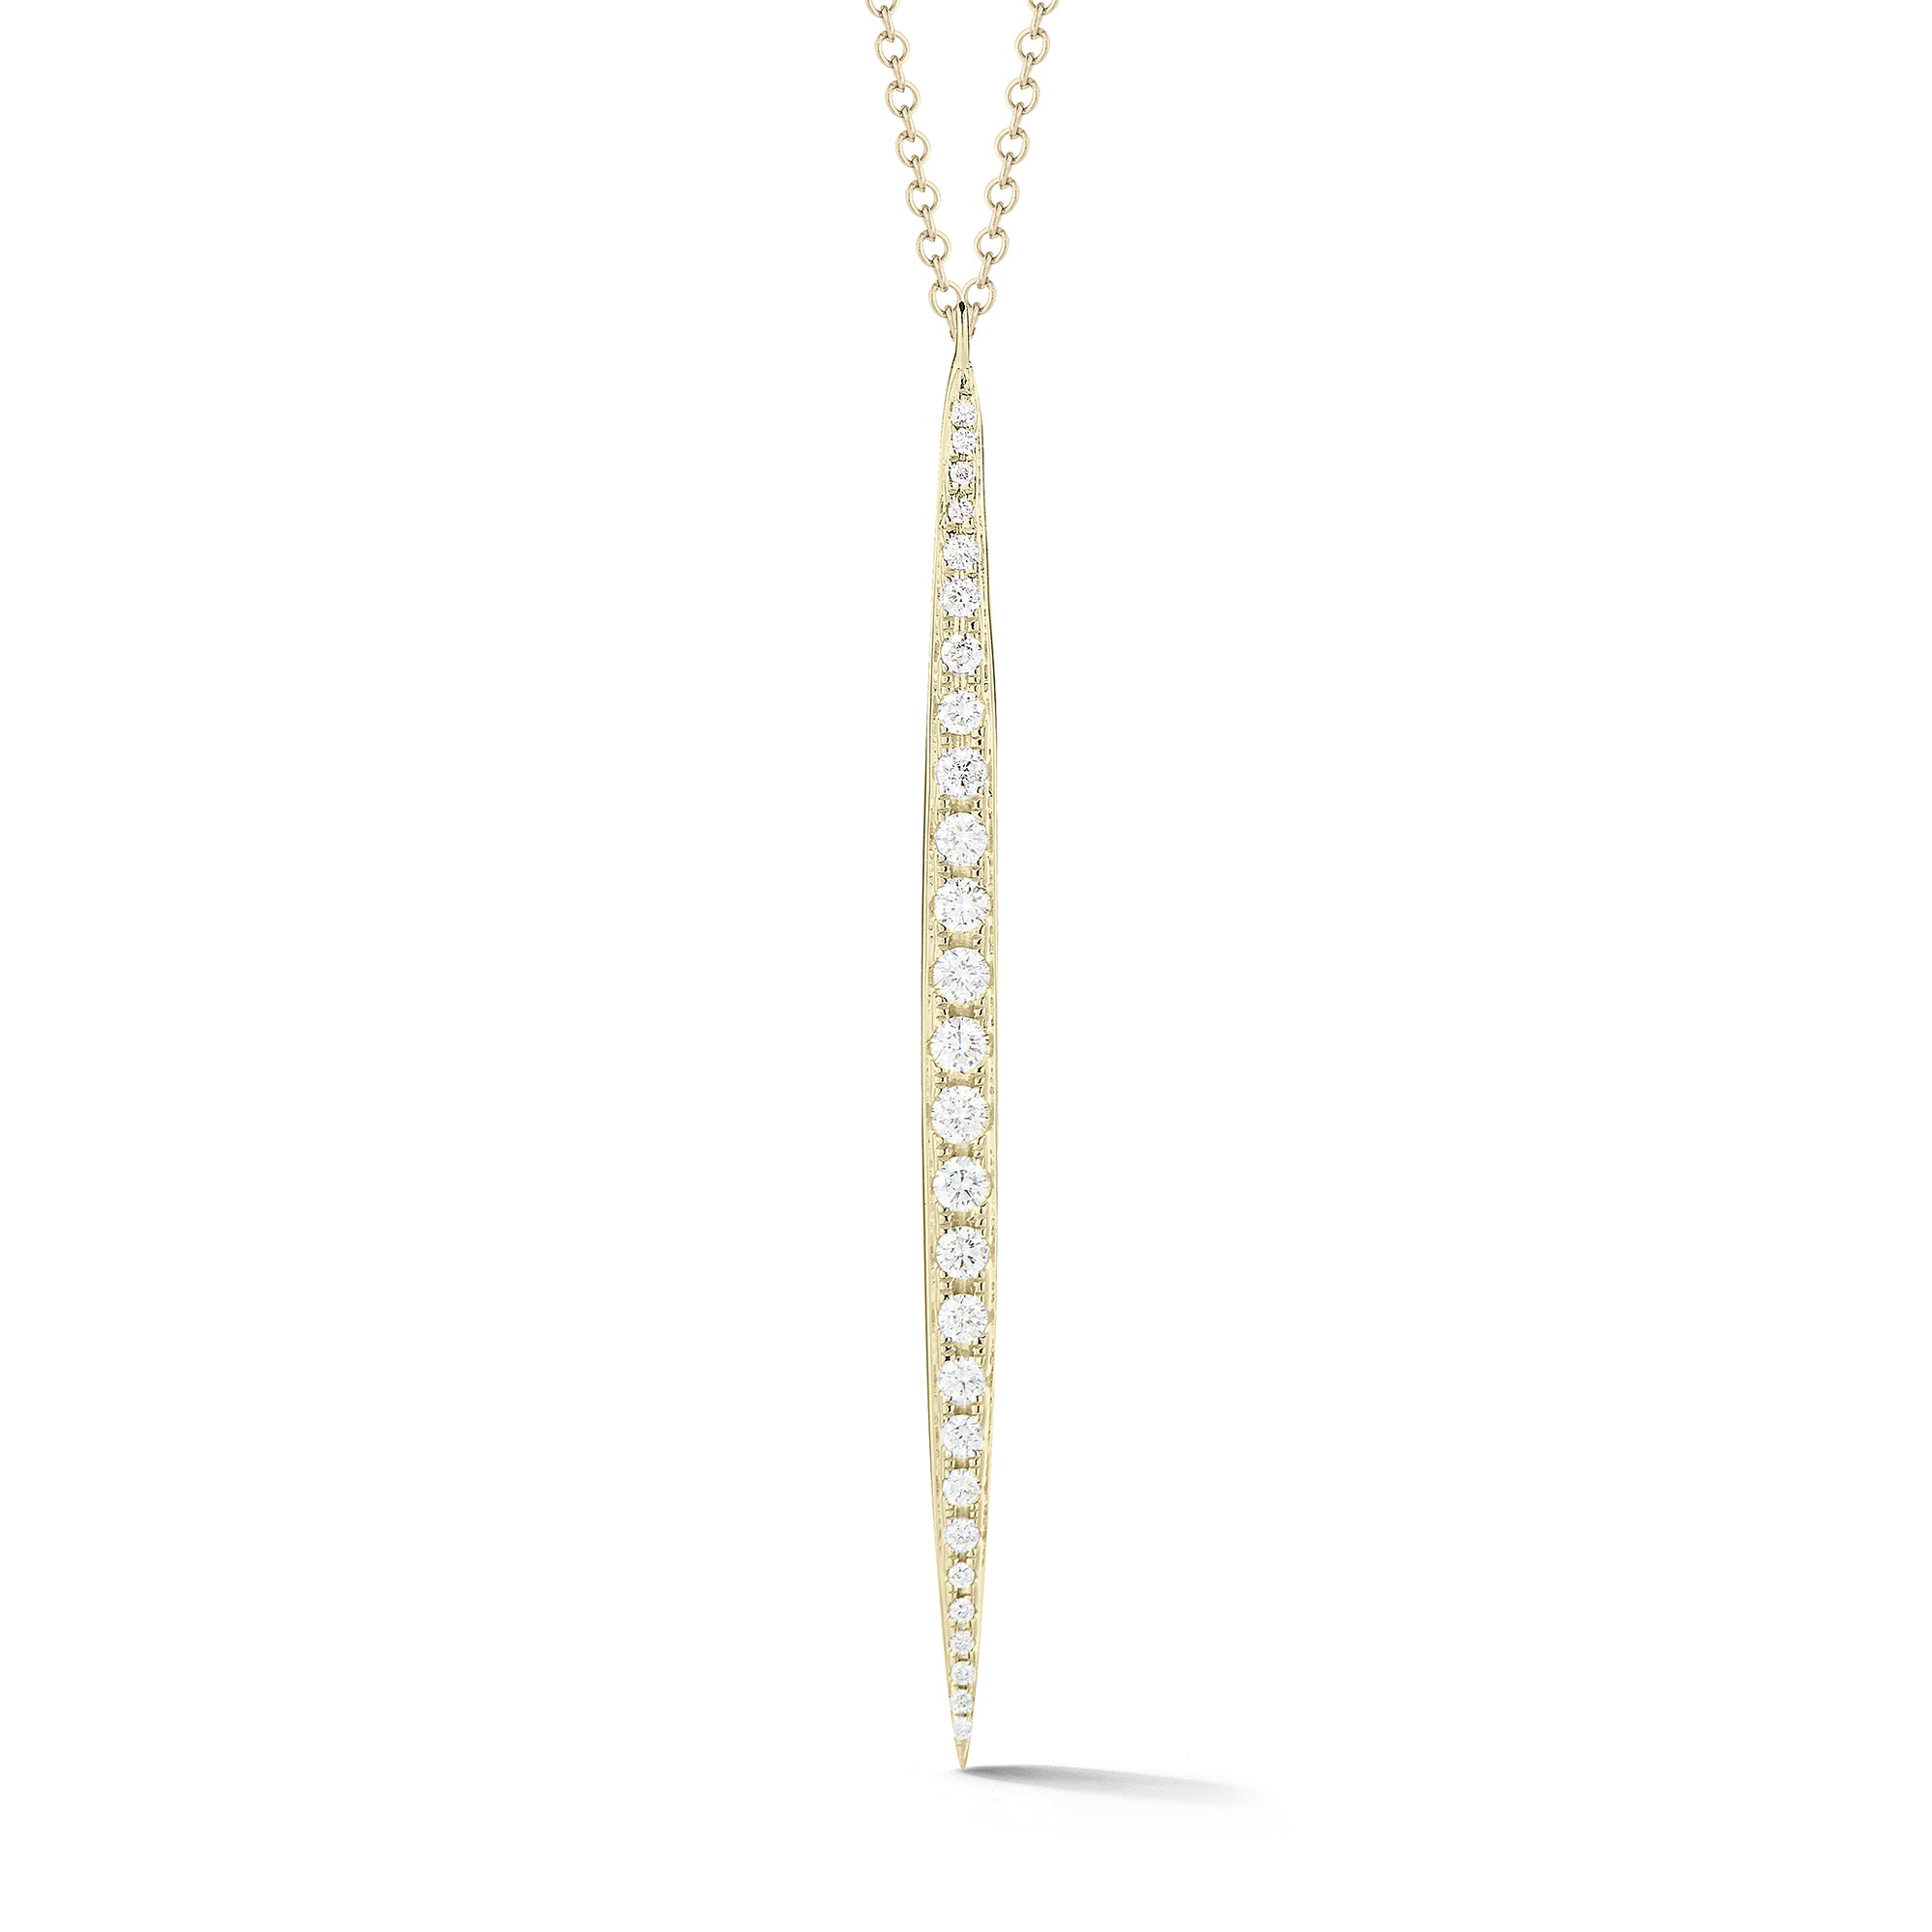 Diamond Dagger Pendant Necklace  -14K gold weighing 2.37 grams  -27 round brilliant diamonds totaling 0.29 carats.